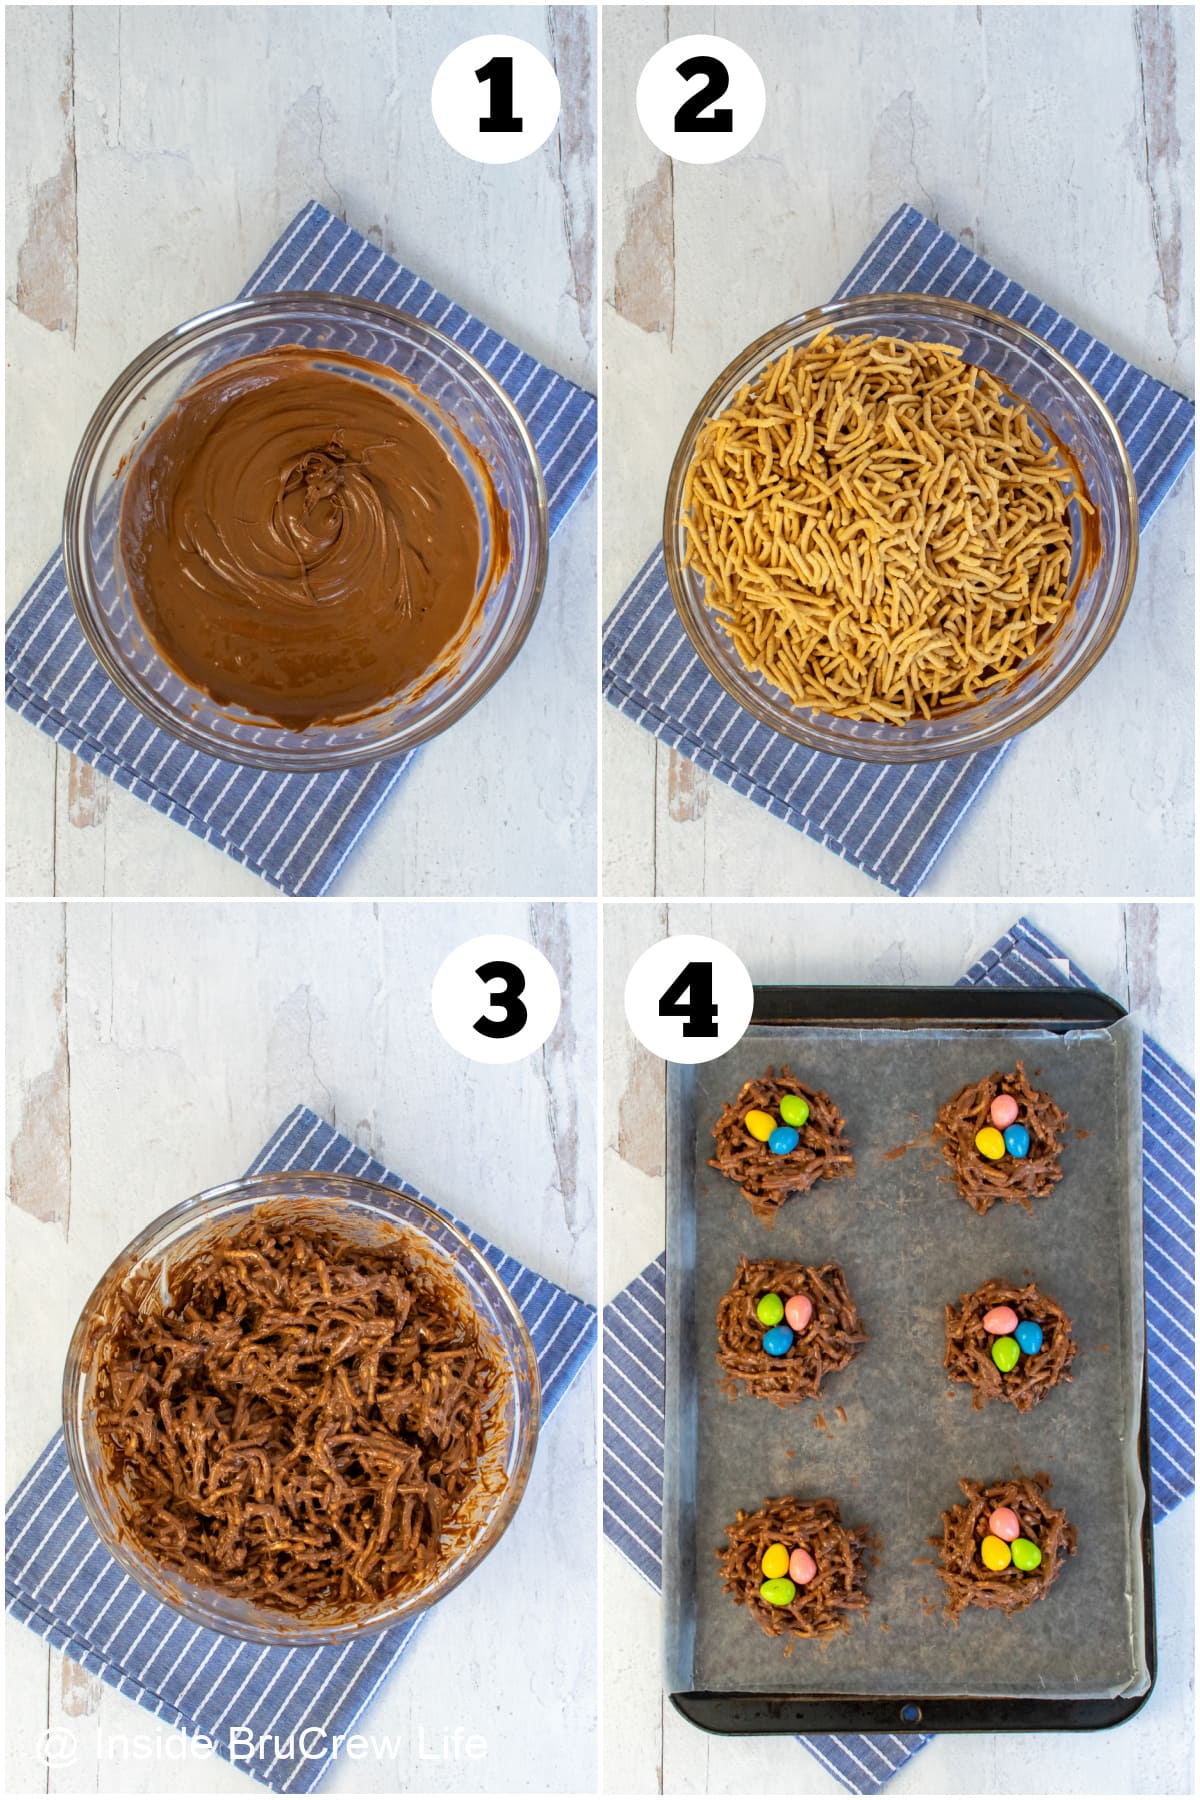 Four pictures collaged together showing how to make nest cookies.